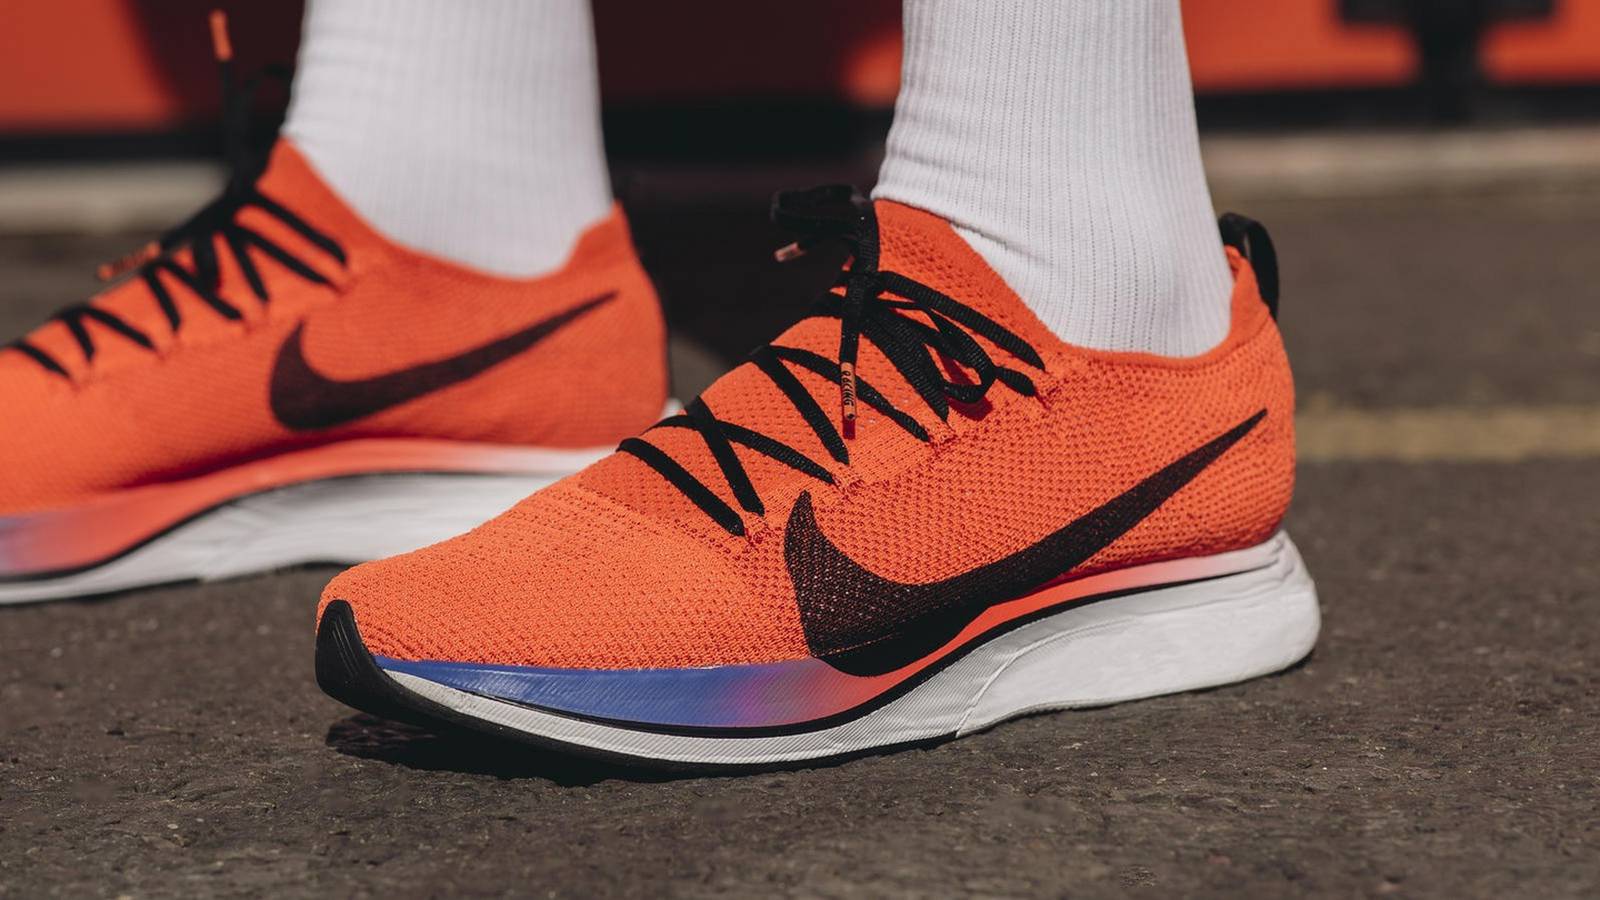 Will Nike Vaporfly help me run faster, are they the cost? – The Irish